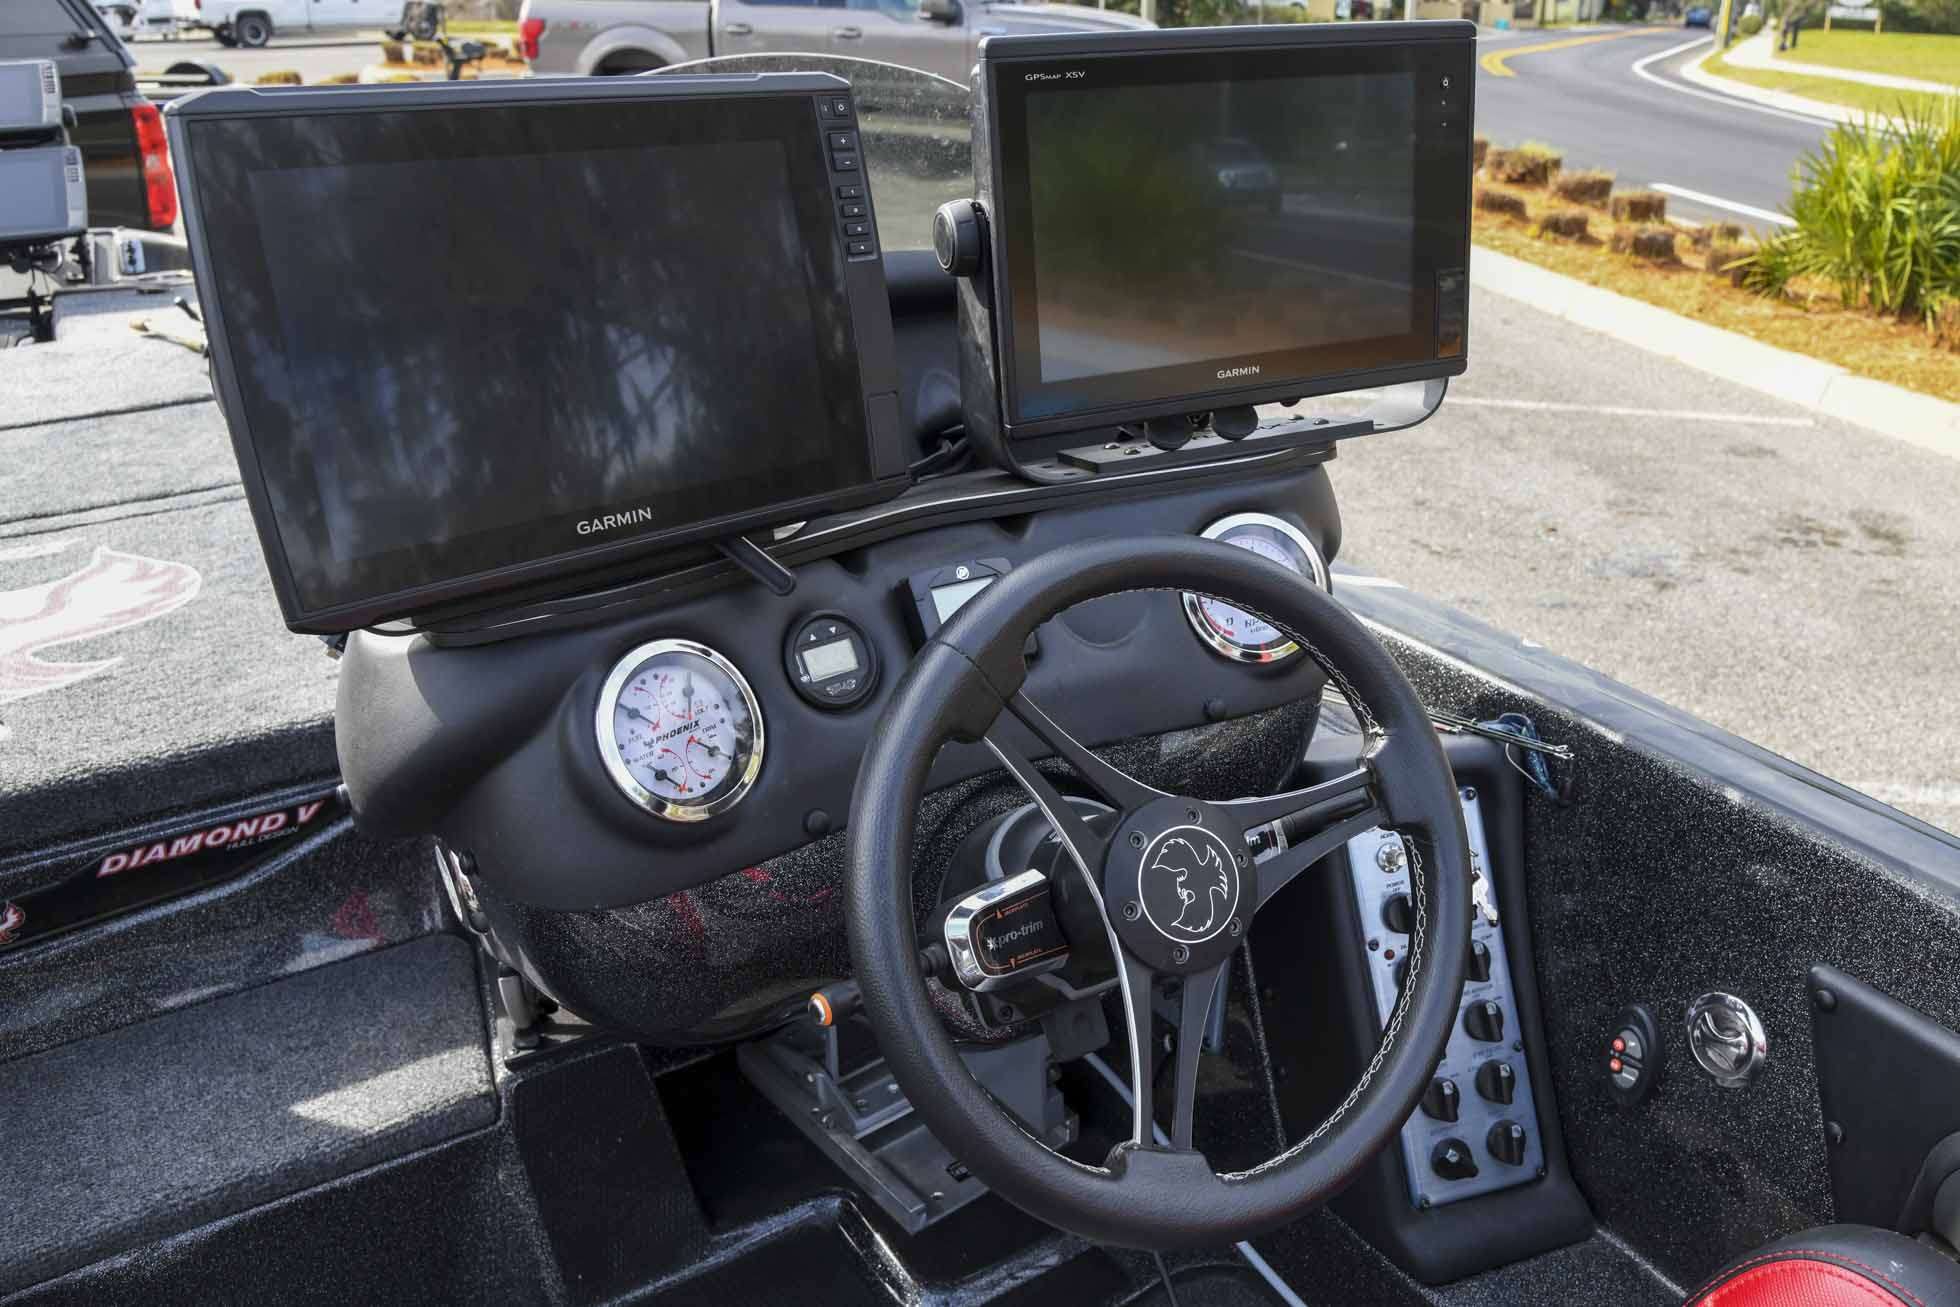  His console is flanked by two 12-inch Garmin Echomap Ultras. âI run one that is nothing but mapping, and I run one that is nothing but sonar,â Mullins explained. 